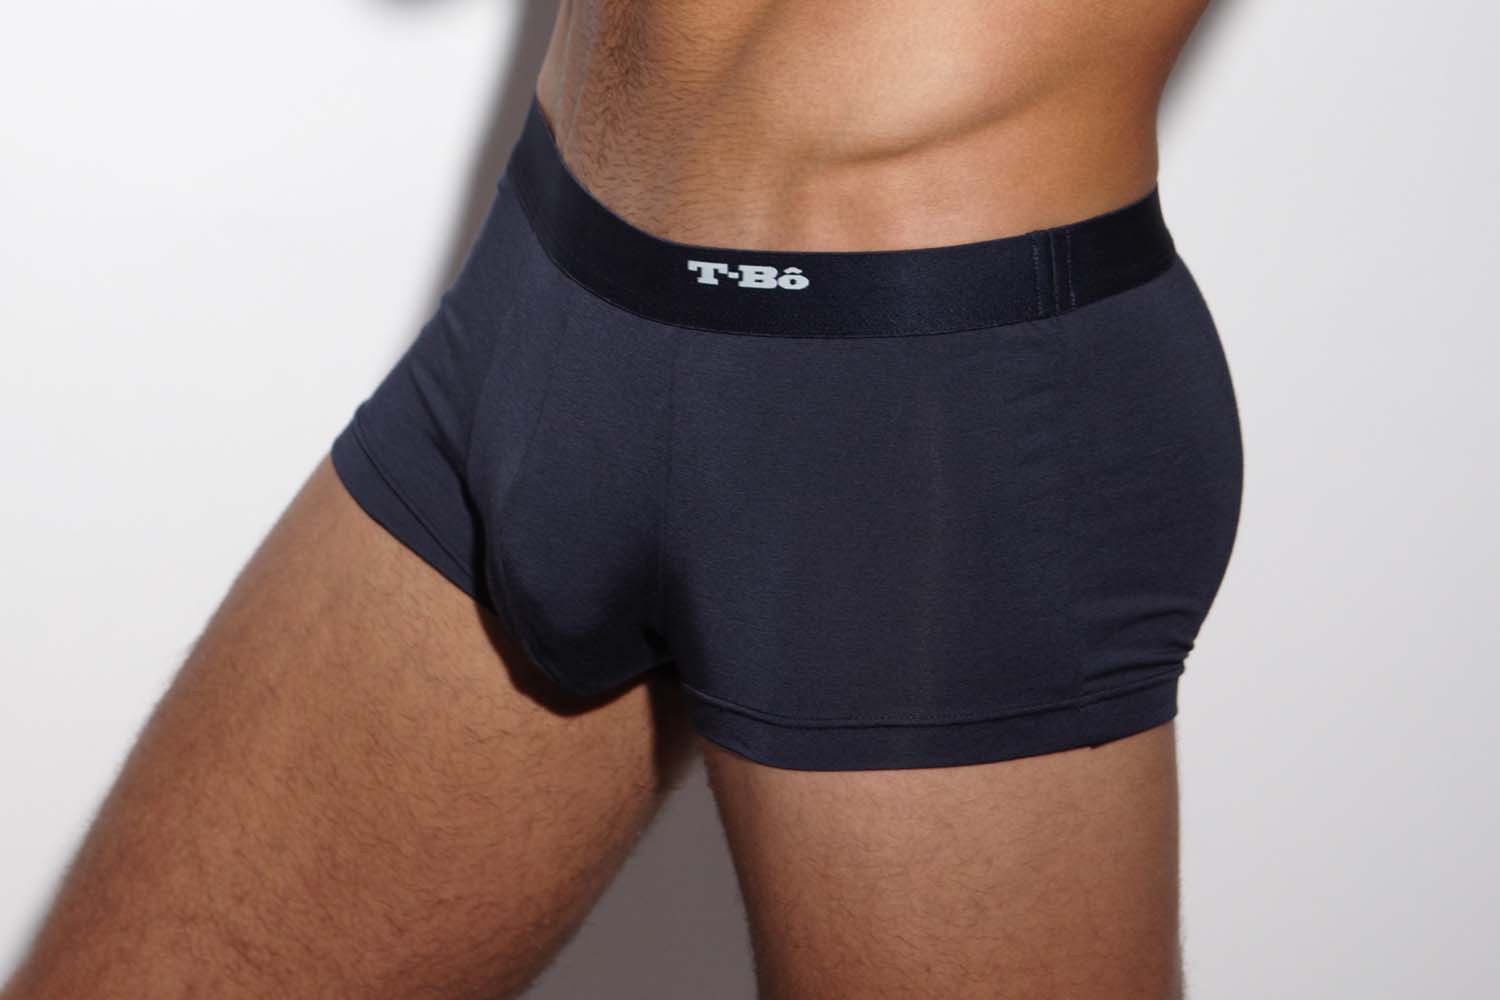 https://www.themanual.com/wp-content/uploads/sites/9/2019/11/tbo-boxer-brief.jpg?fit=800%2C533&p=1